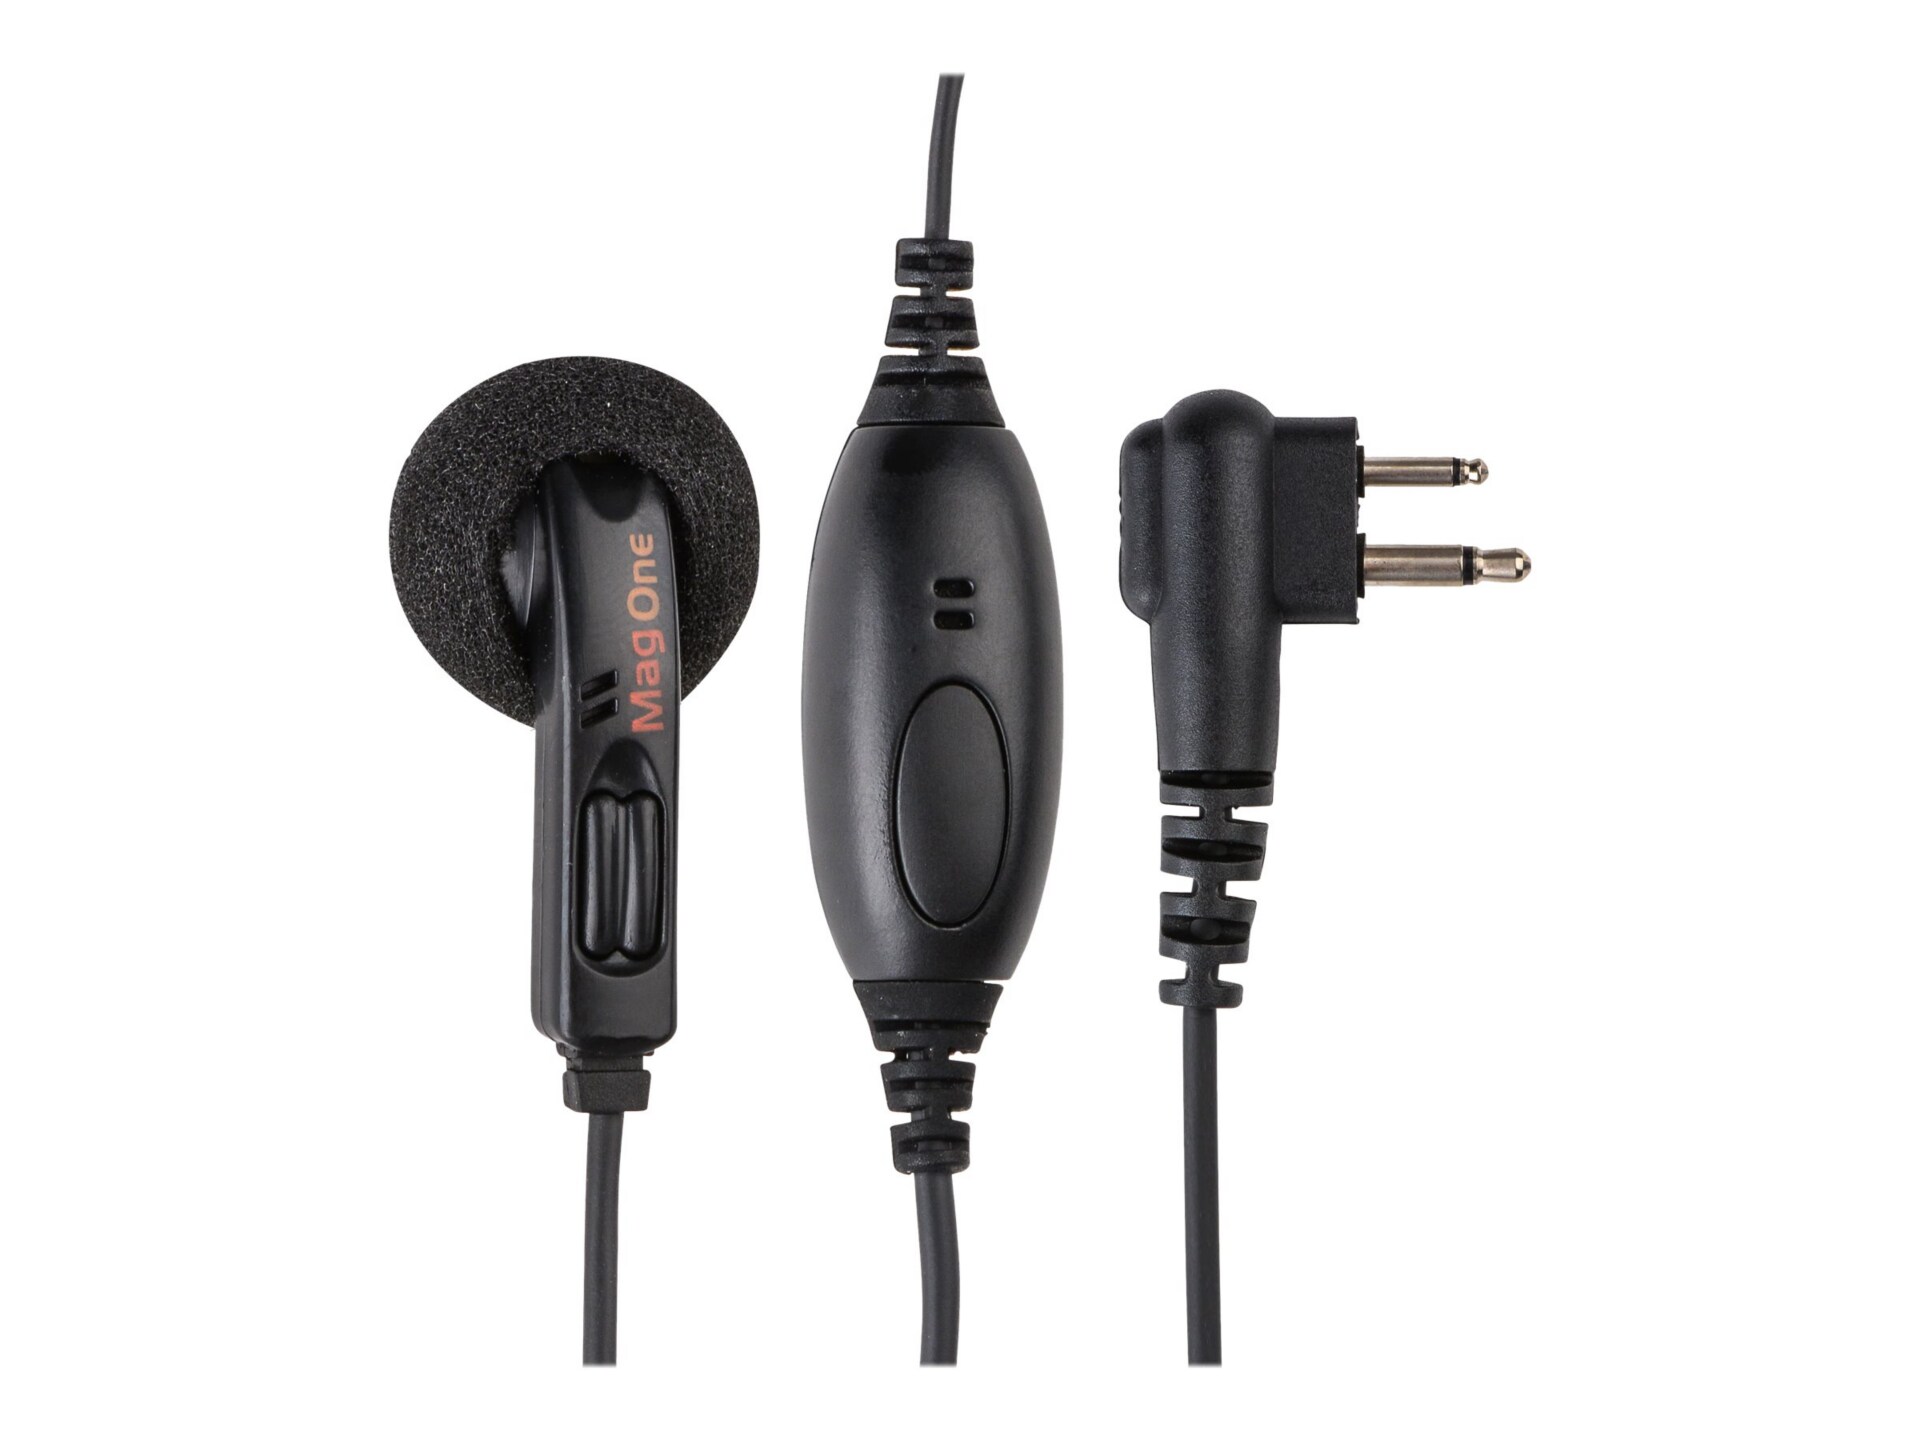 Motorola Mag One PMLN4442A - earphones with mic